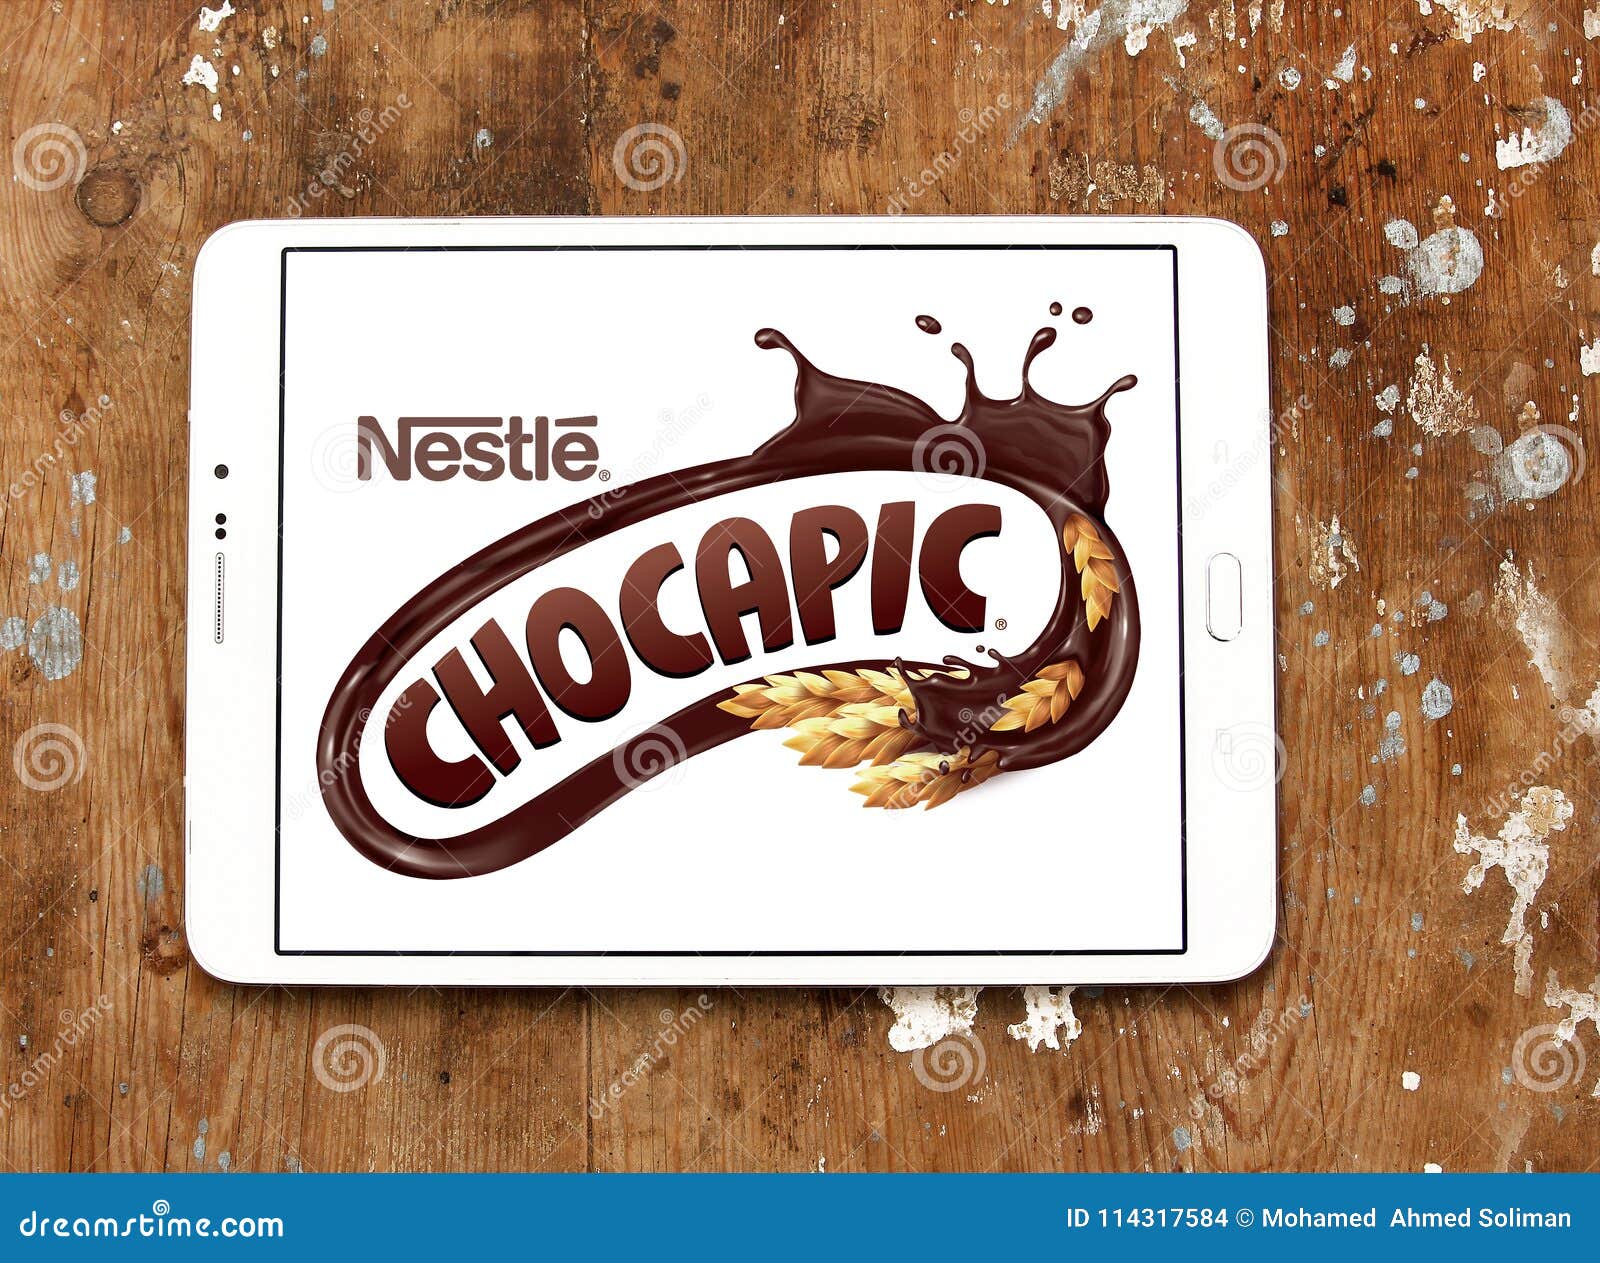 Chocapic nestle brand logo editorial stock image. Image of commercial -  114317584